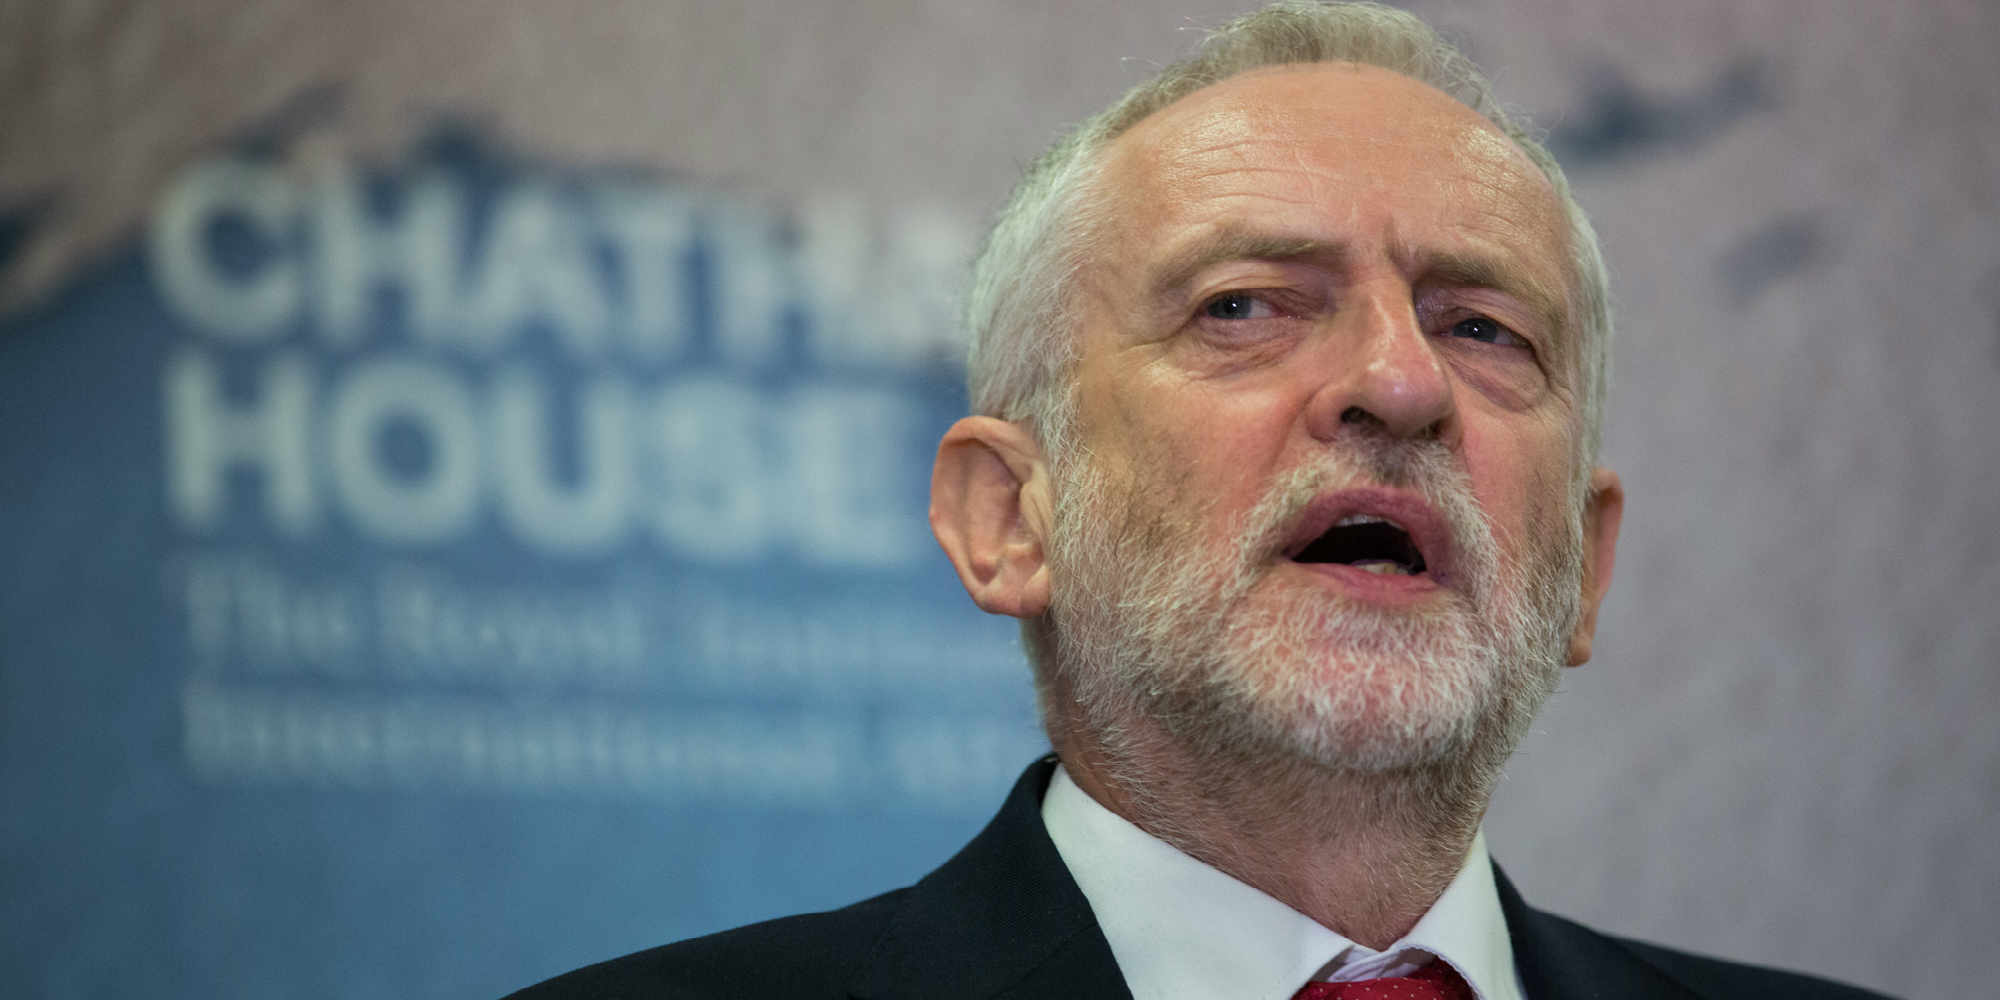 Europe in convulsions even as Corbyn rises in Britain